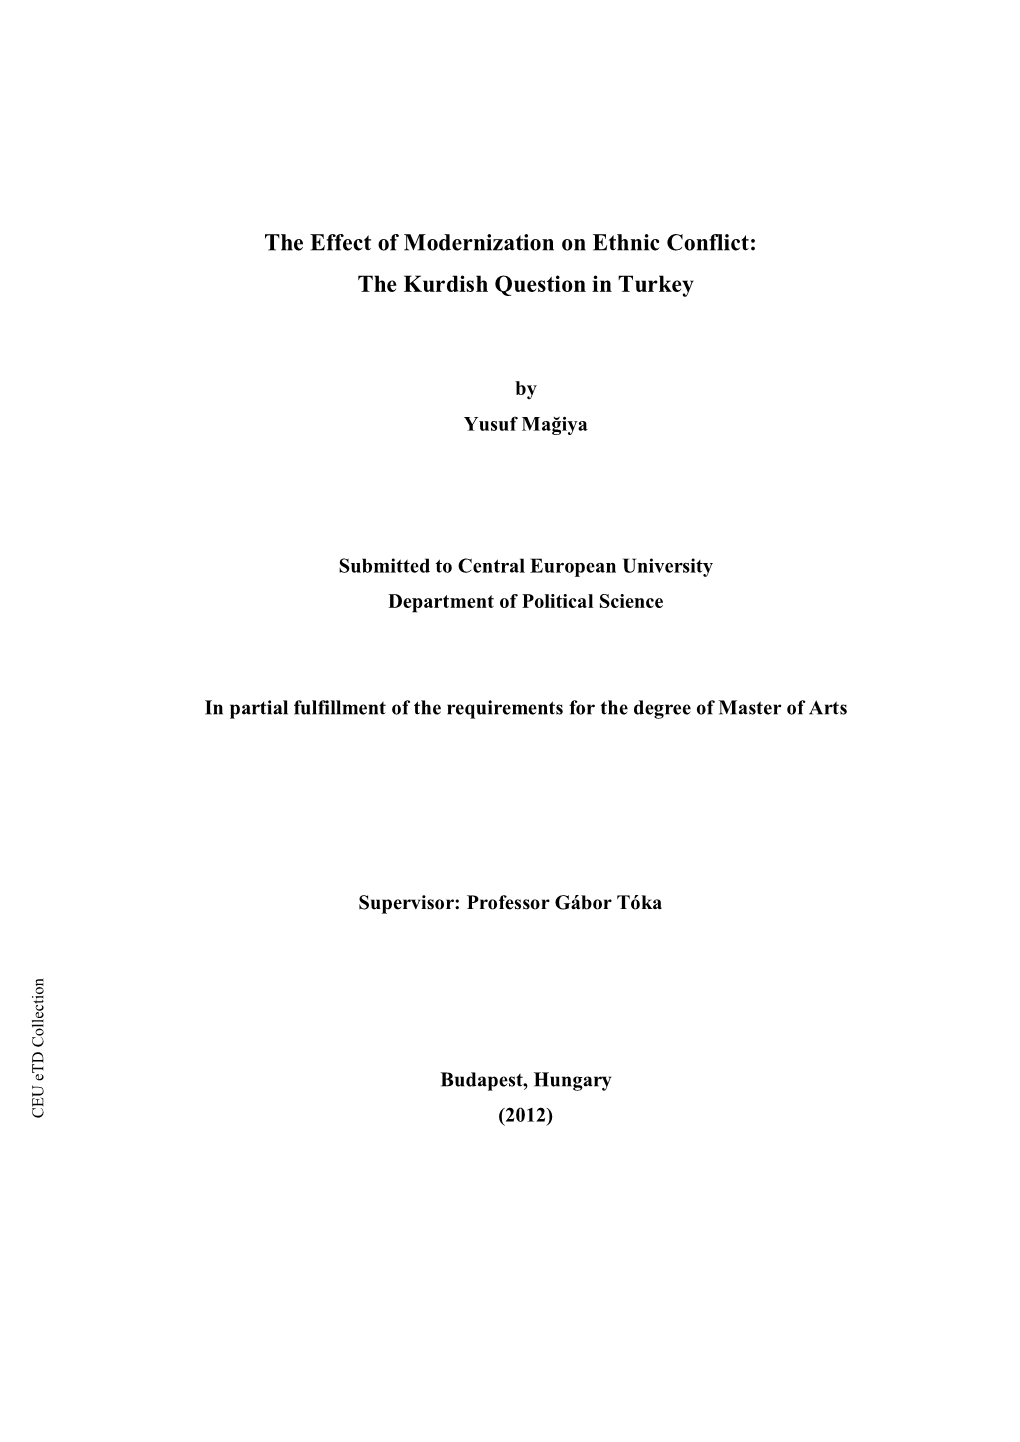 The Effect of Modernization on Ethnic Conflict: the Kurdish Question in Turkey I CEU Etd Collection Chapter 3 Historical Background to the Conflict